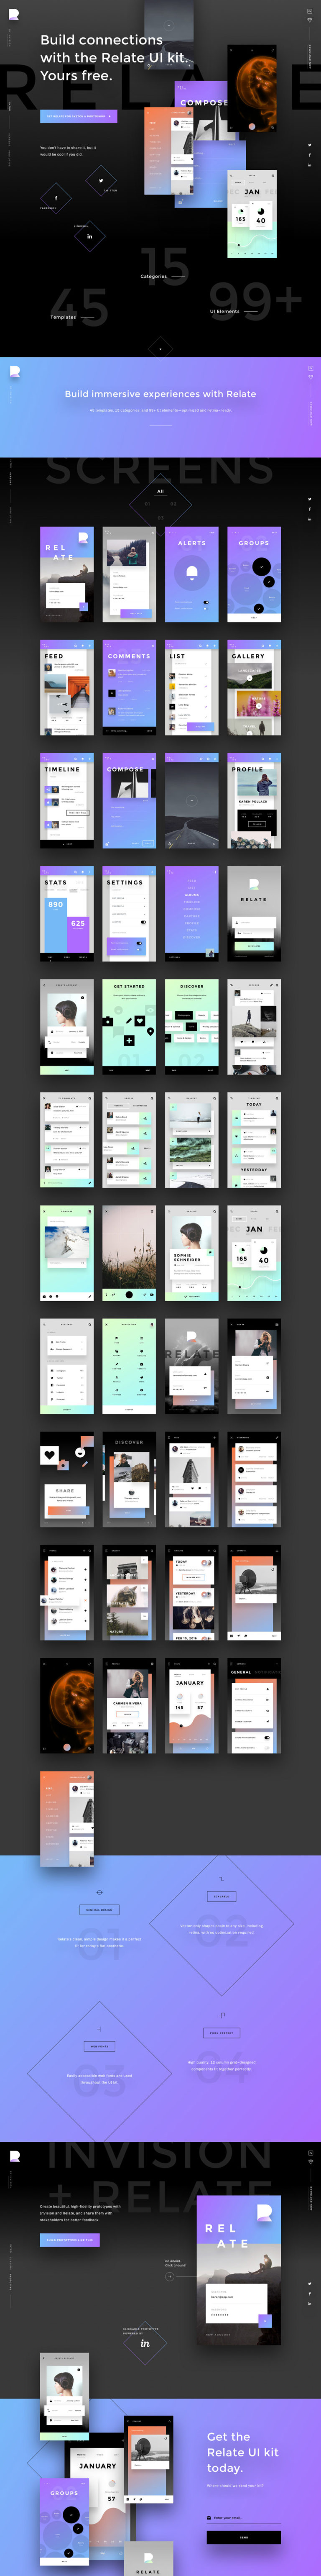 Download Relate UI Kit by InVision | Free Mockups, Best Free PSD Mockups - ApeMockups